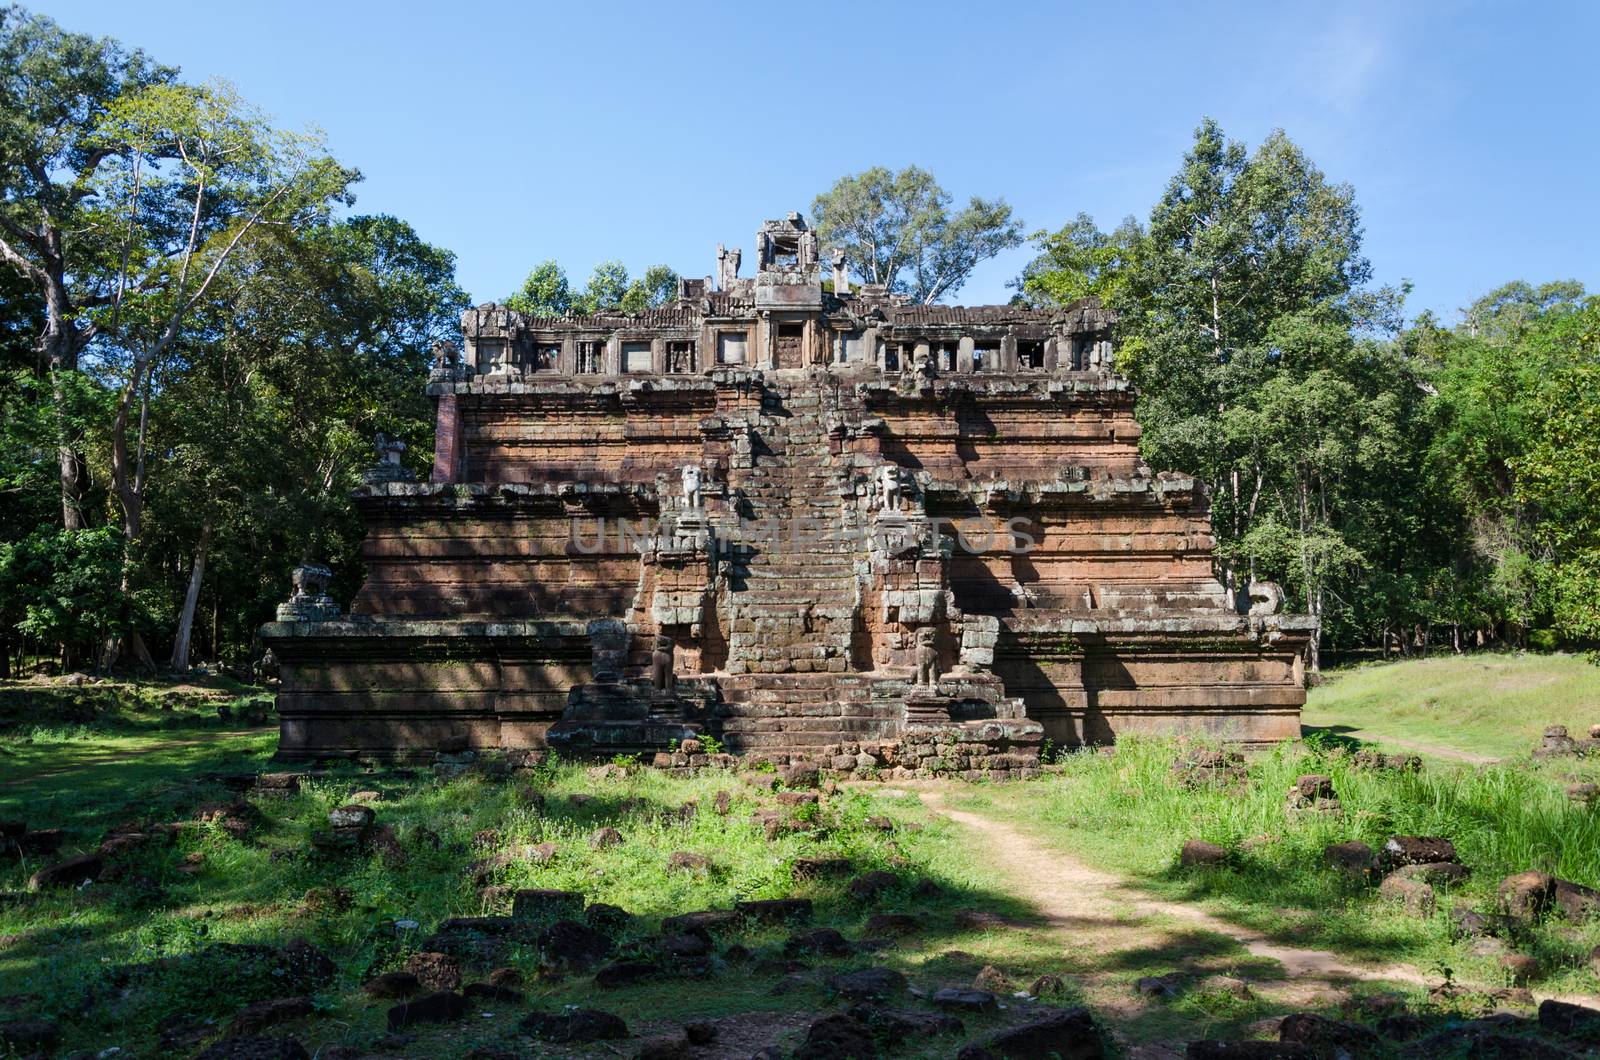 The celestial temple Phimeanakas is part of the royal palace Angkor Thom in Cambodia